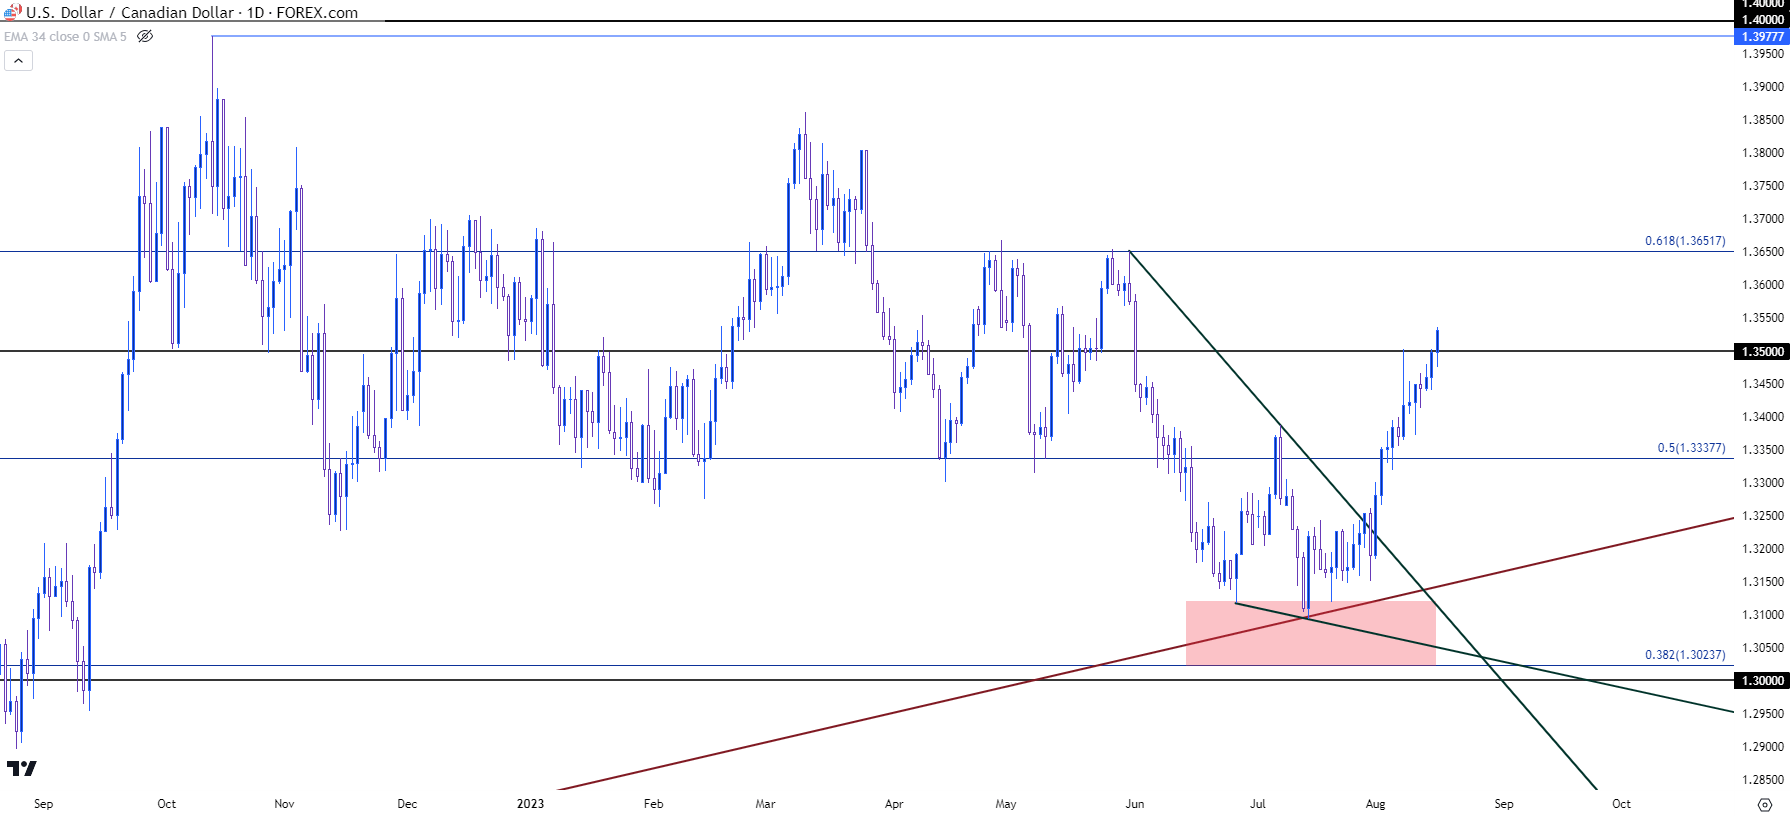 Sell the breakout of USDCAD - USD/CAD - vsa for October 13, 2021